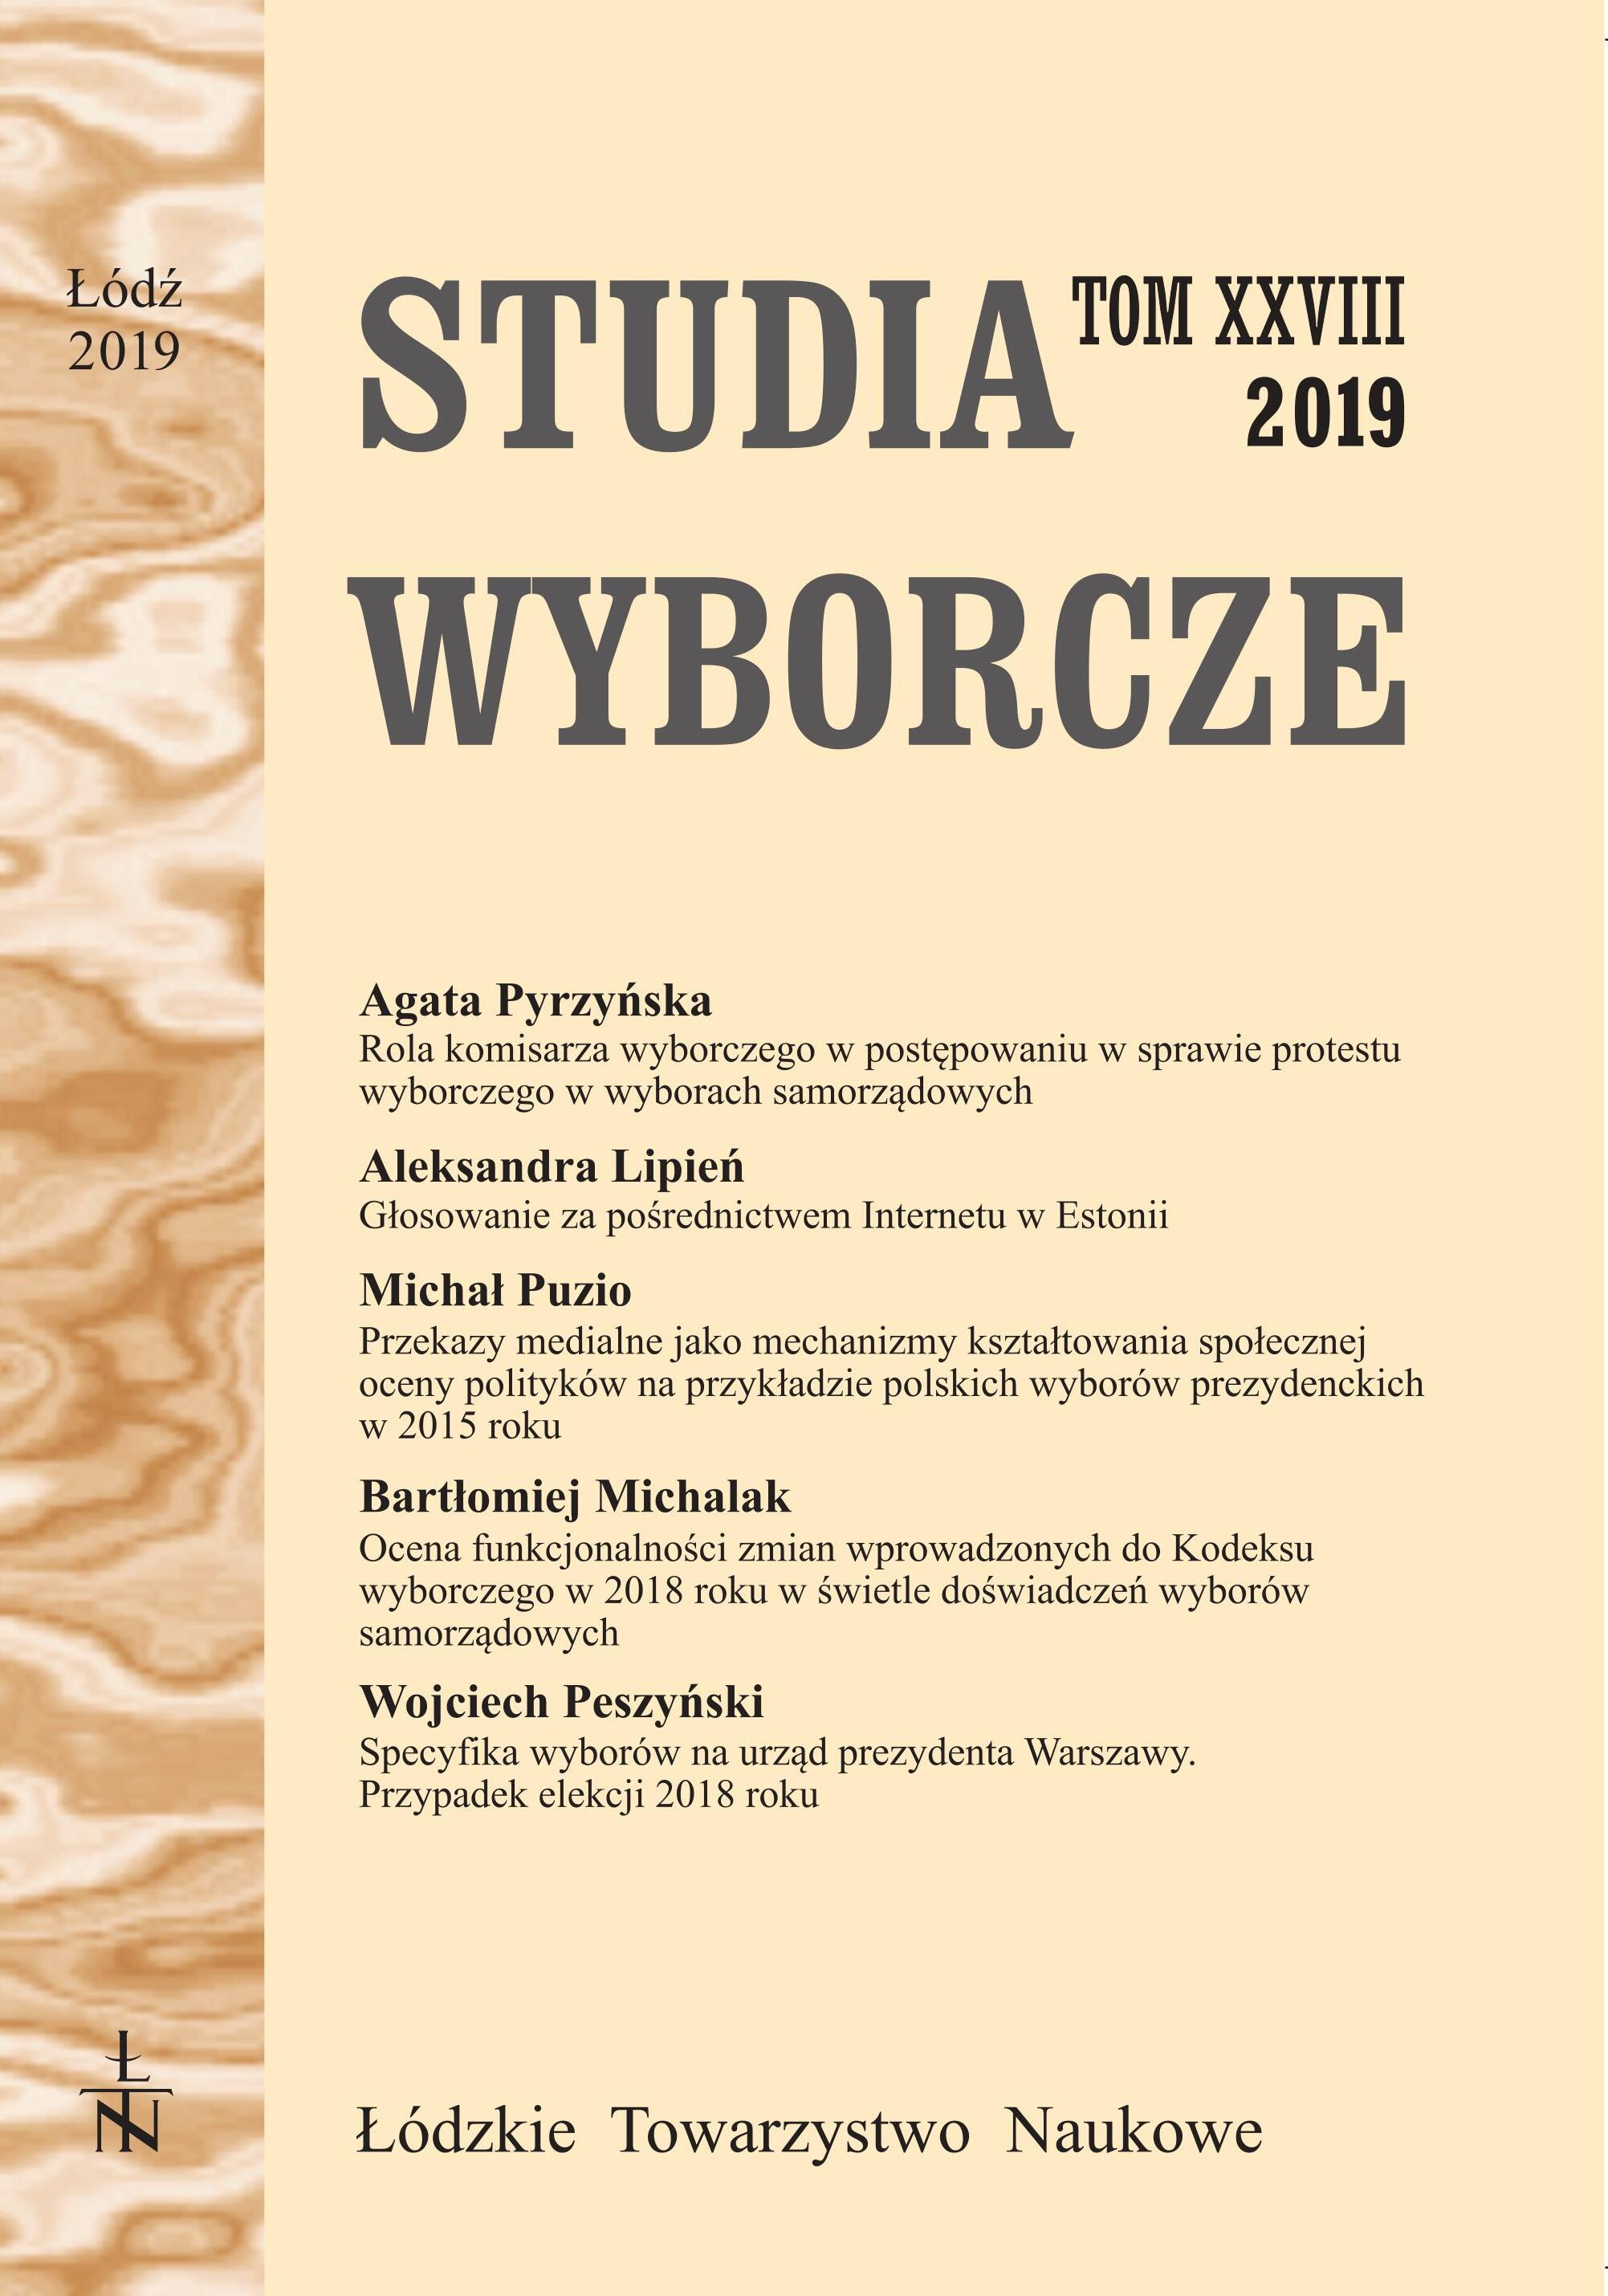 Polish electoral and referendum bibliography for 2018 Cover Image